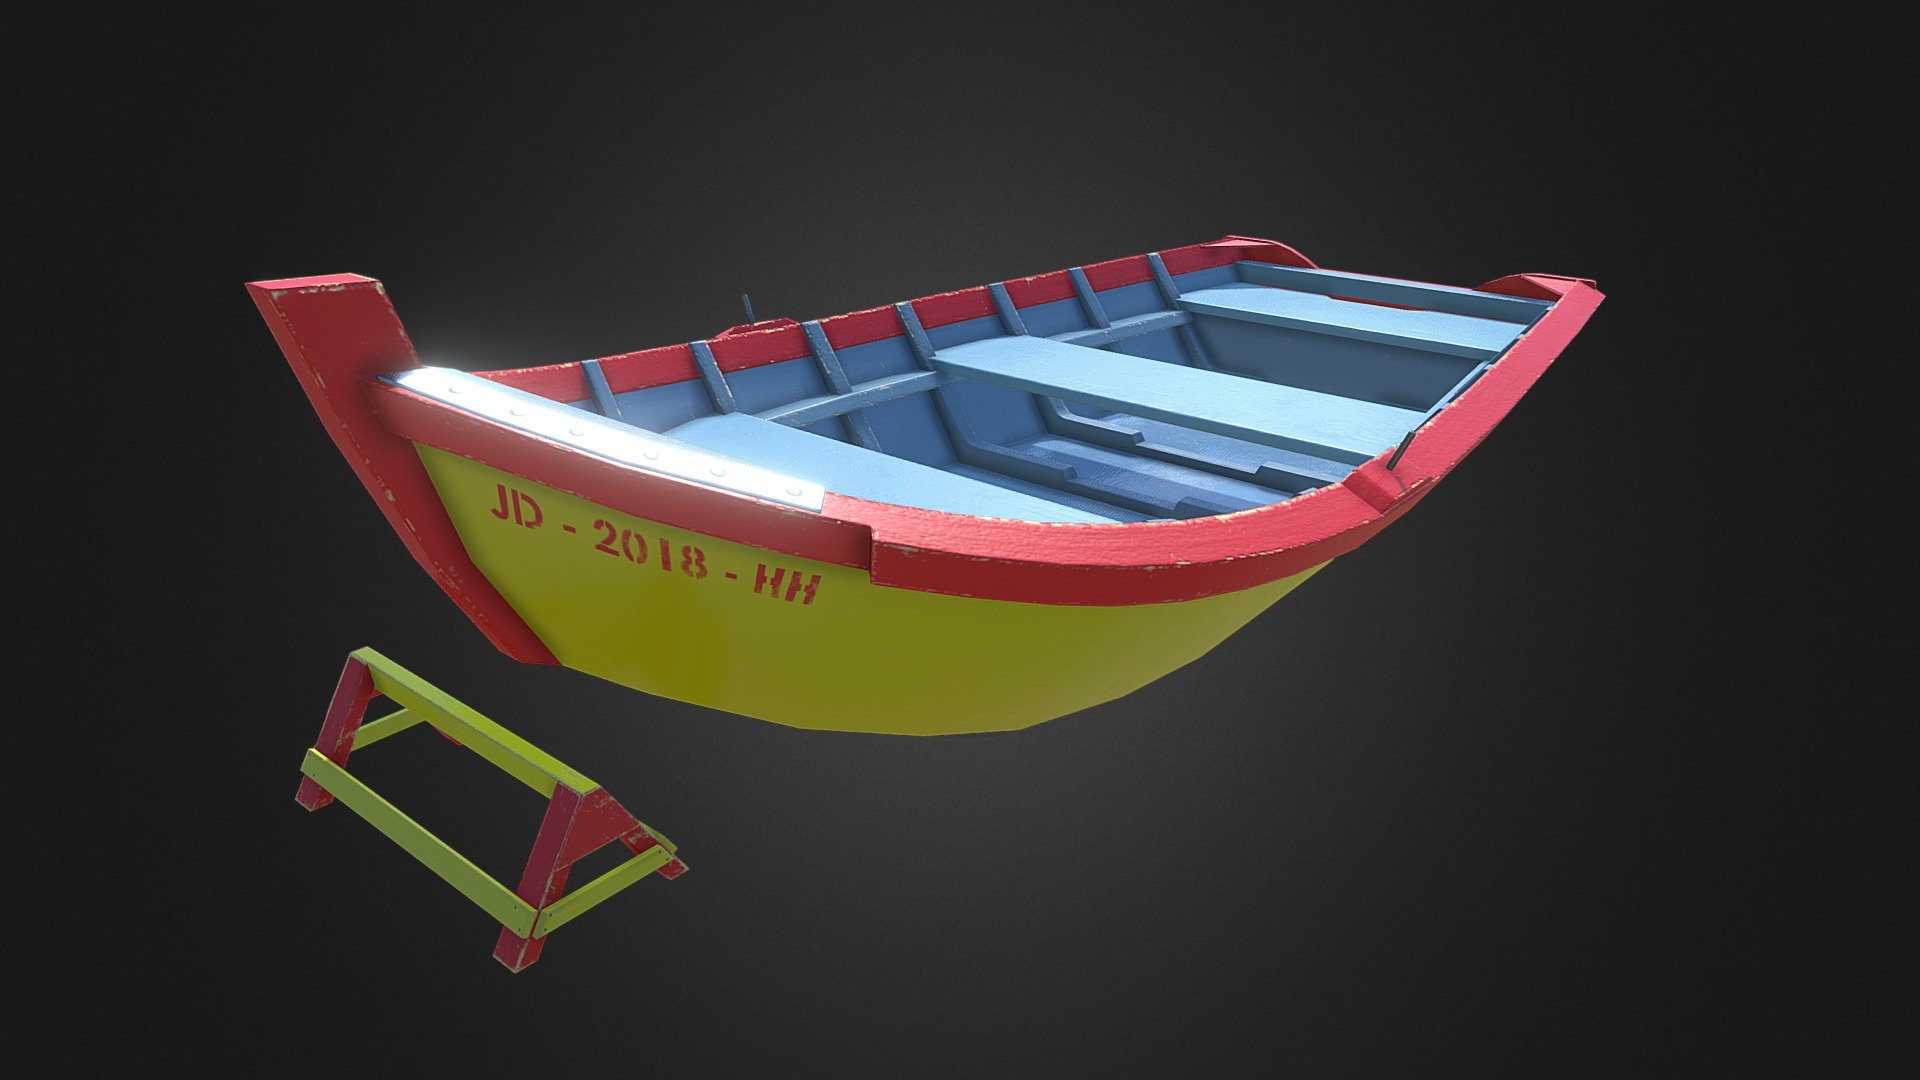 Do someone like fishing? Not me&hellip; but I had a lot of Caribbean fun creating this colorful boat.

Made for Janco Interactive 3d model